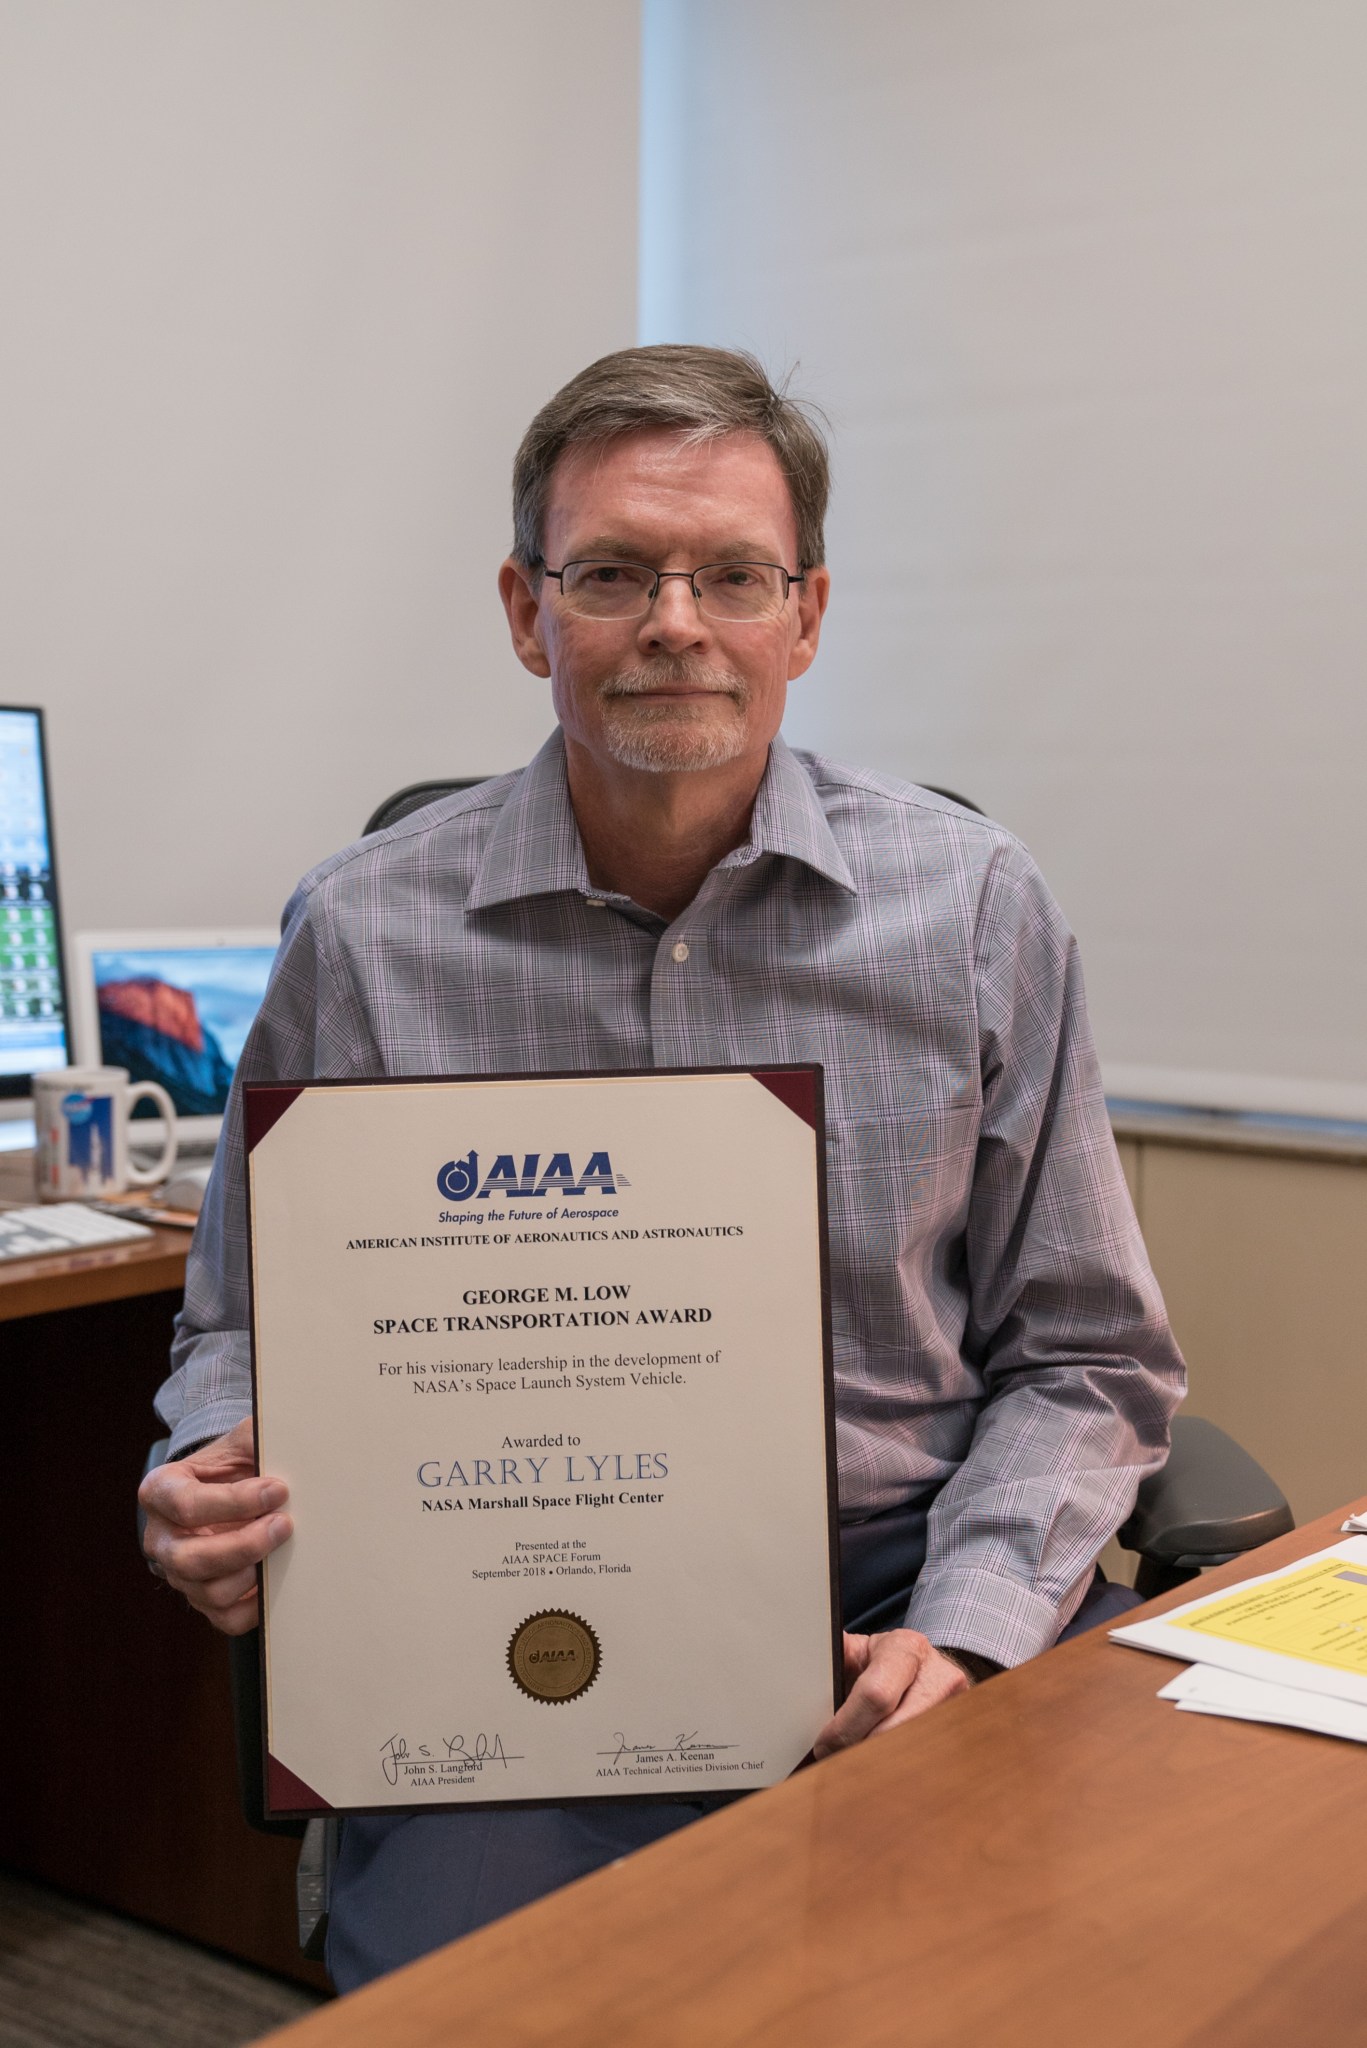 Gay Lyles awarded the 2018 American Association of Aeronautics and Astronautics (AIAA) George M. Low Award for Space Transportat